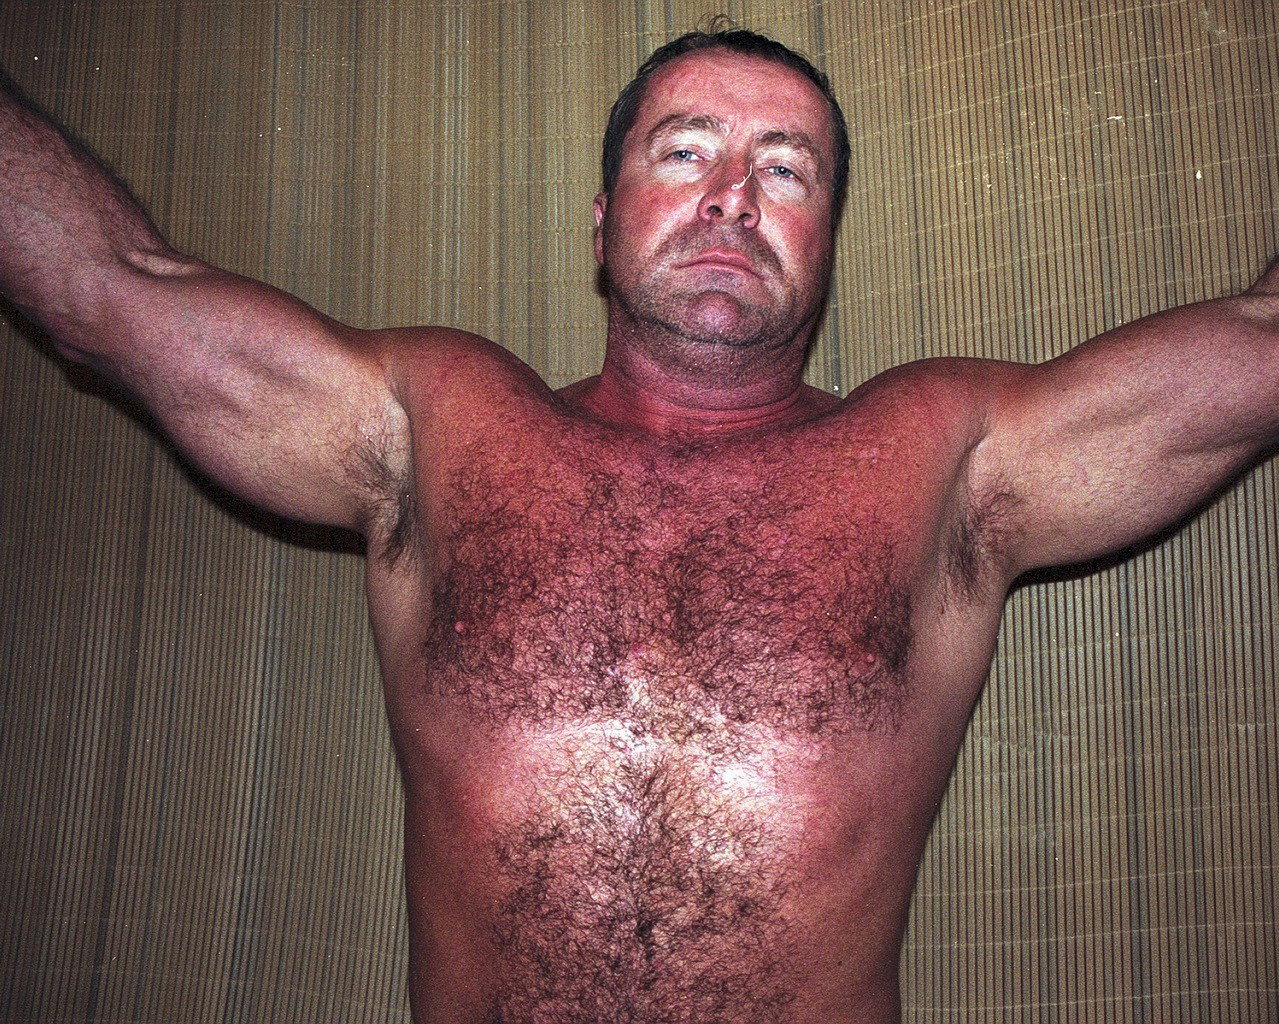 Photo by Hairy Musclebears with the username @hairymusclebears,  June 3, 2019 at 6:58 PM. The post is about the topic Carolina Jim Musclebear and the text says 'Muscledaddy Outdoors gay Campground from USAFUR.com videos #gayarmpitfetish #gaybear #gaywrestling #gaypits #baldmen #beardedmen #menwithbeards #hairyarmpits #hairypits #sweatyarmpits #sweatypits #instasport #instaathlete #instaarmpits #hotjock..'